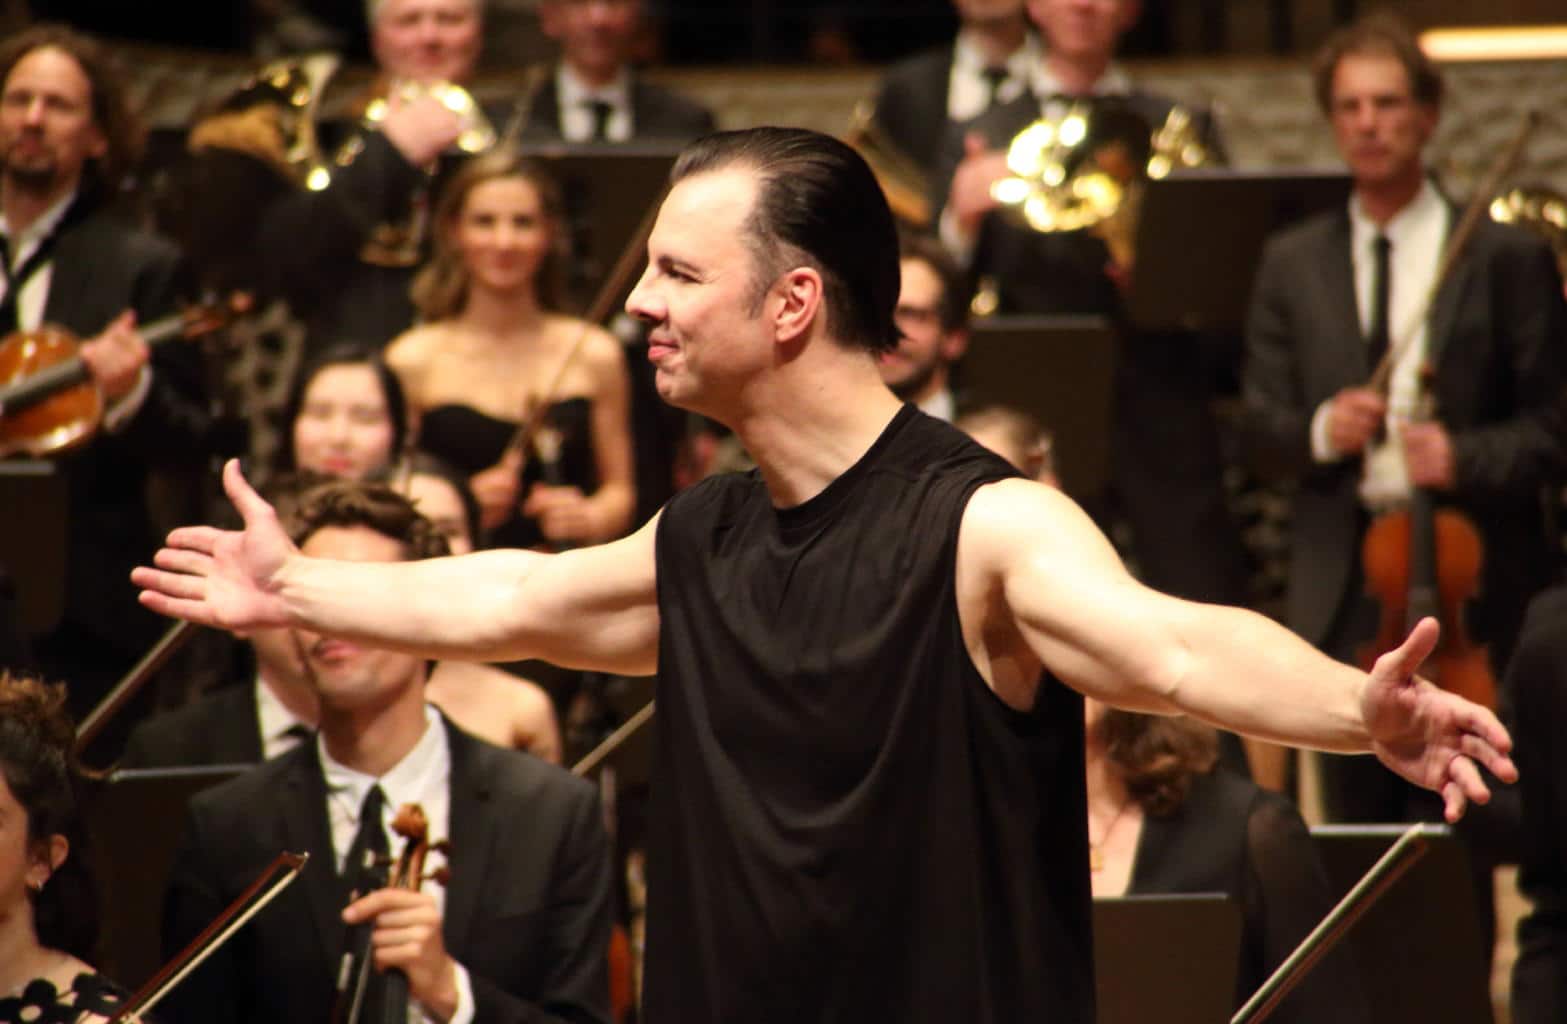 Sleeveless is the new conductor trend